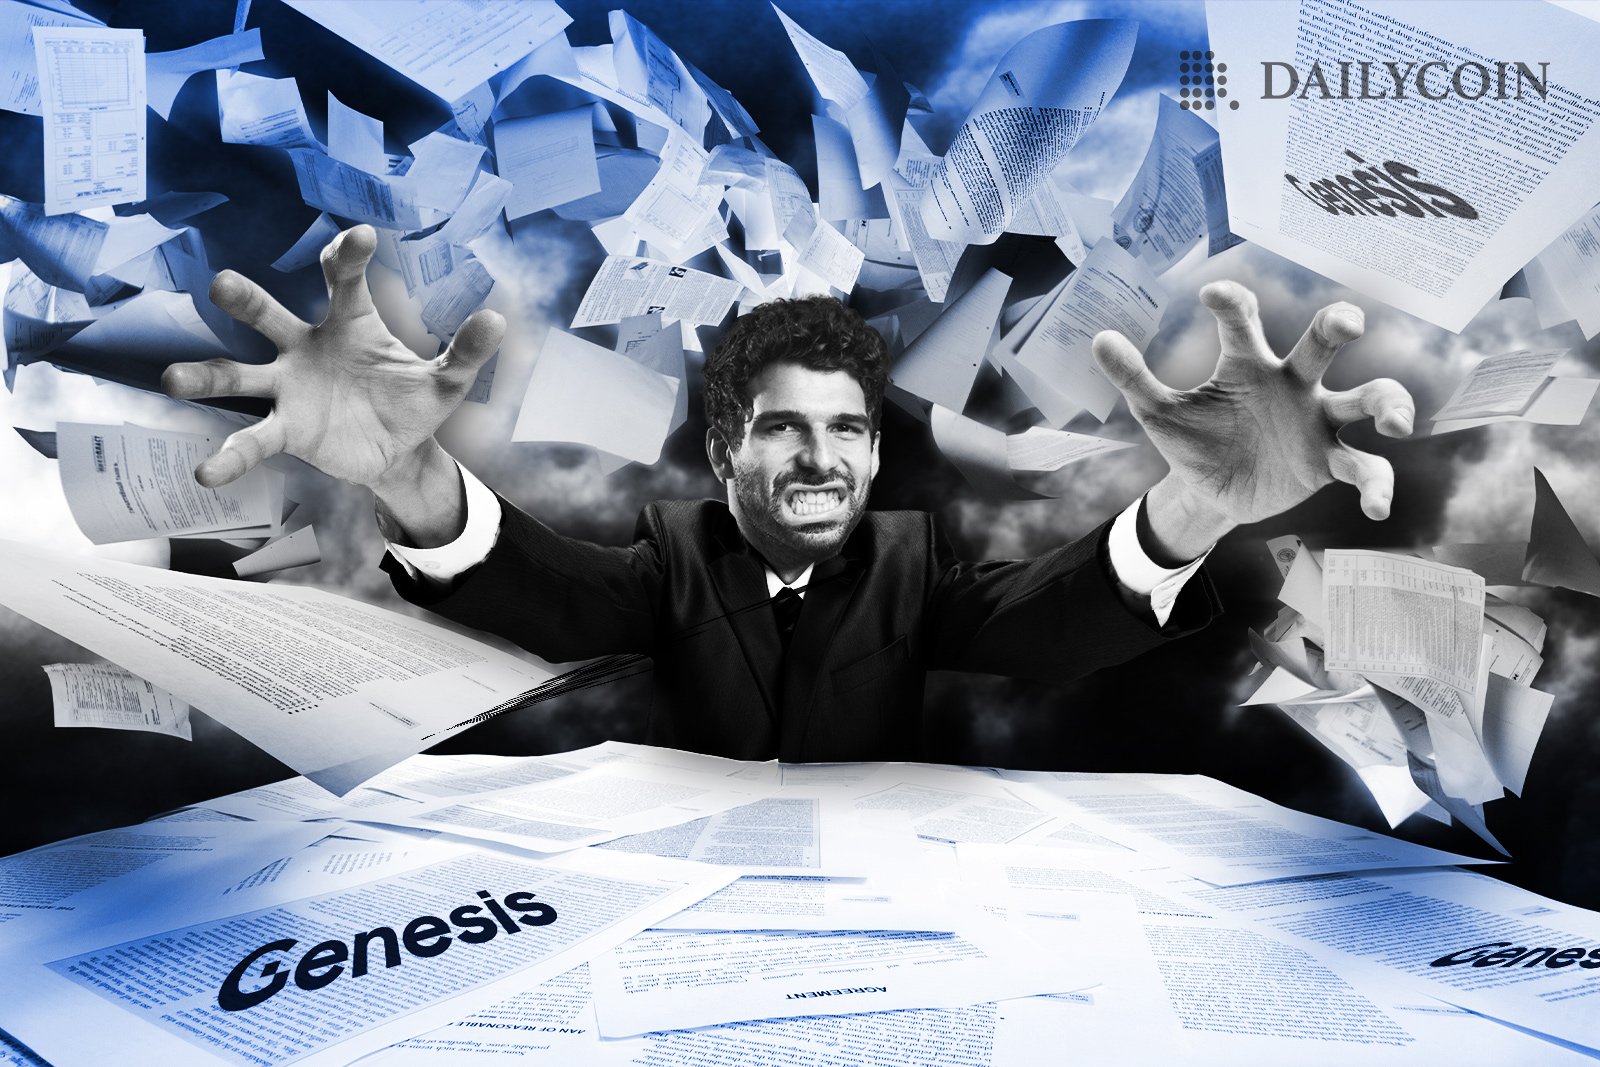 CEO of Genesis Marco Streng angry dealing with bankruptcy papers.